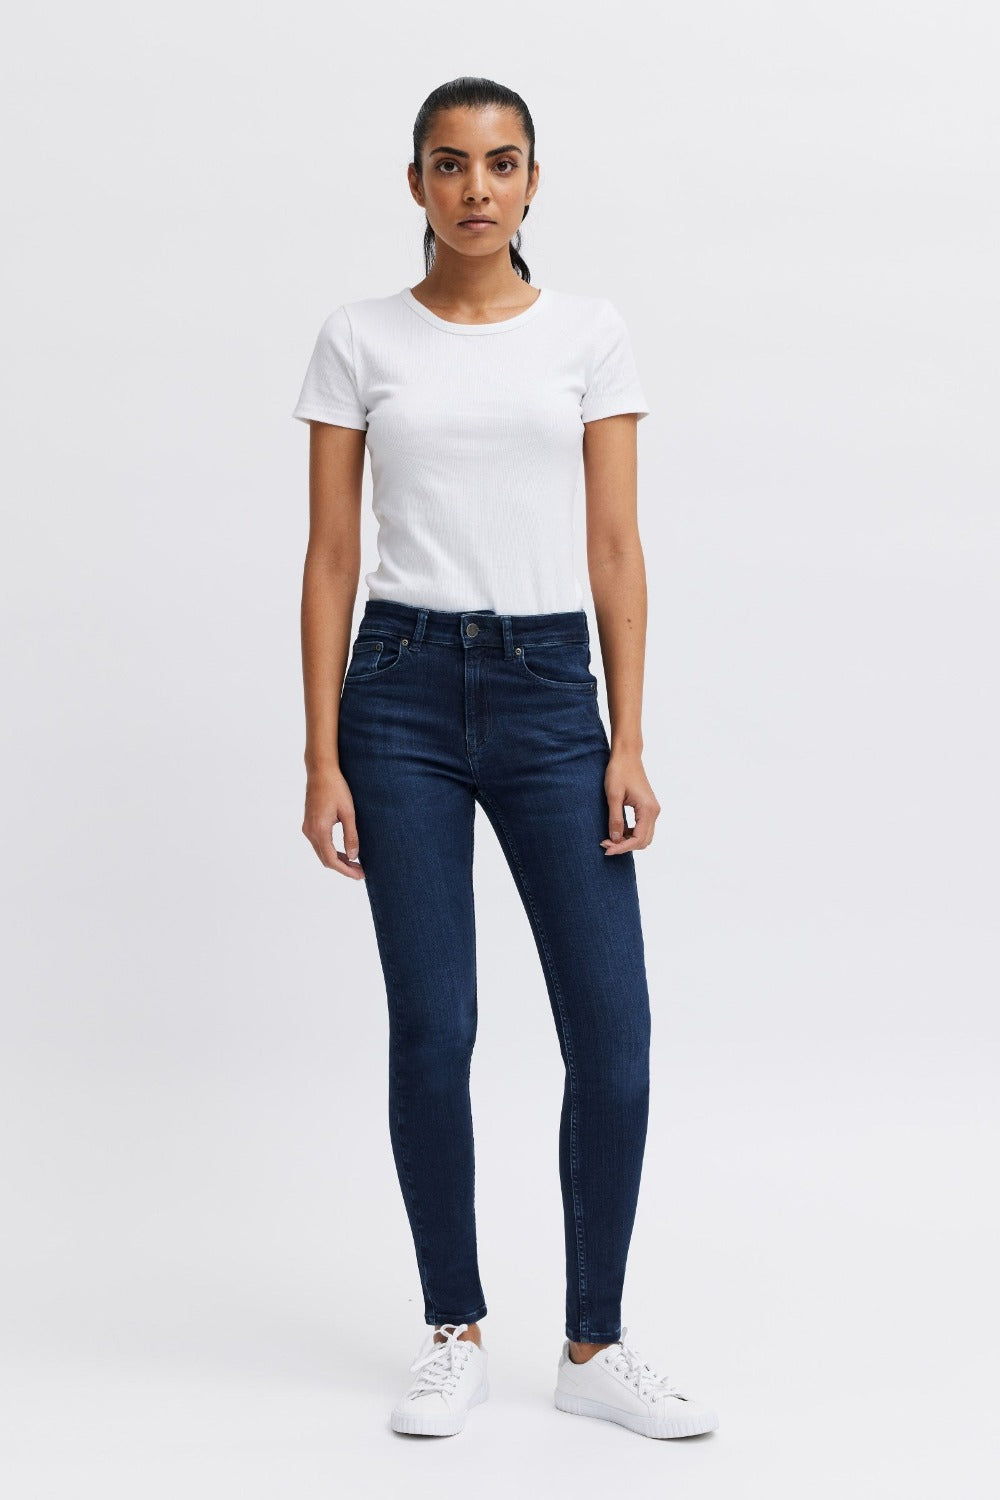 Comfy skinny fit jeans women